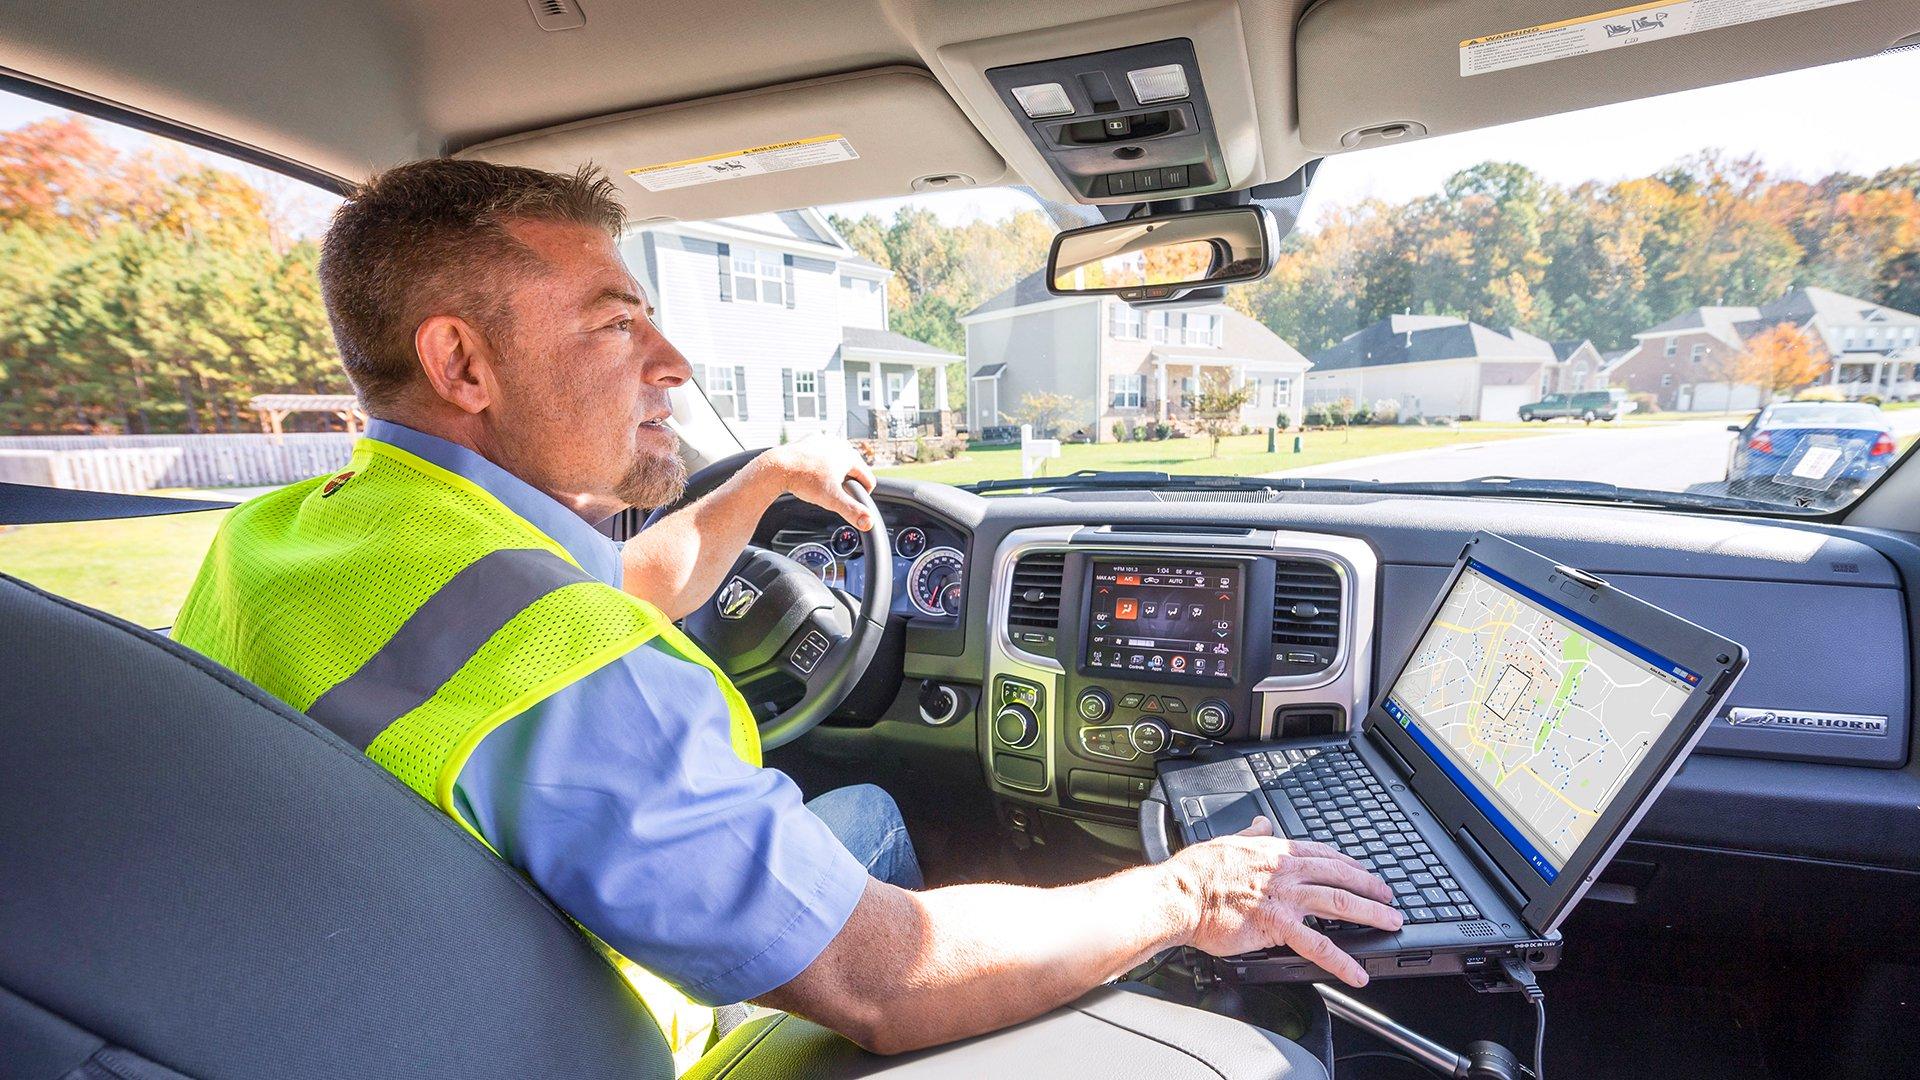 A man wearing a reflective vest looks at a map on an open laptop while he is parked in his work truck in a residential neighborhood.